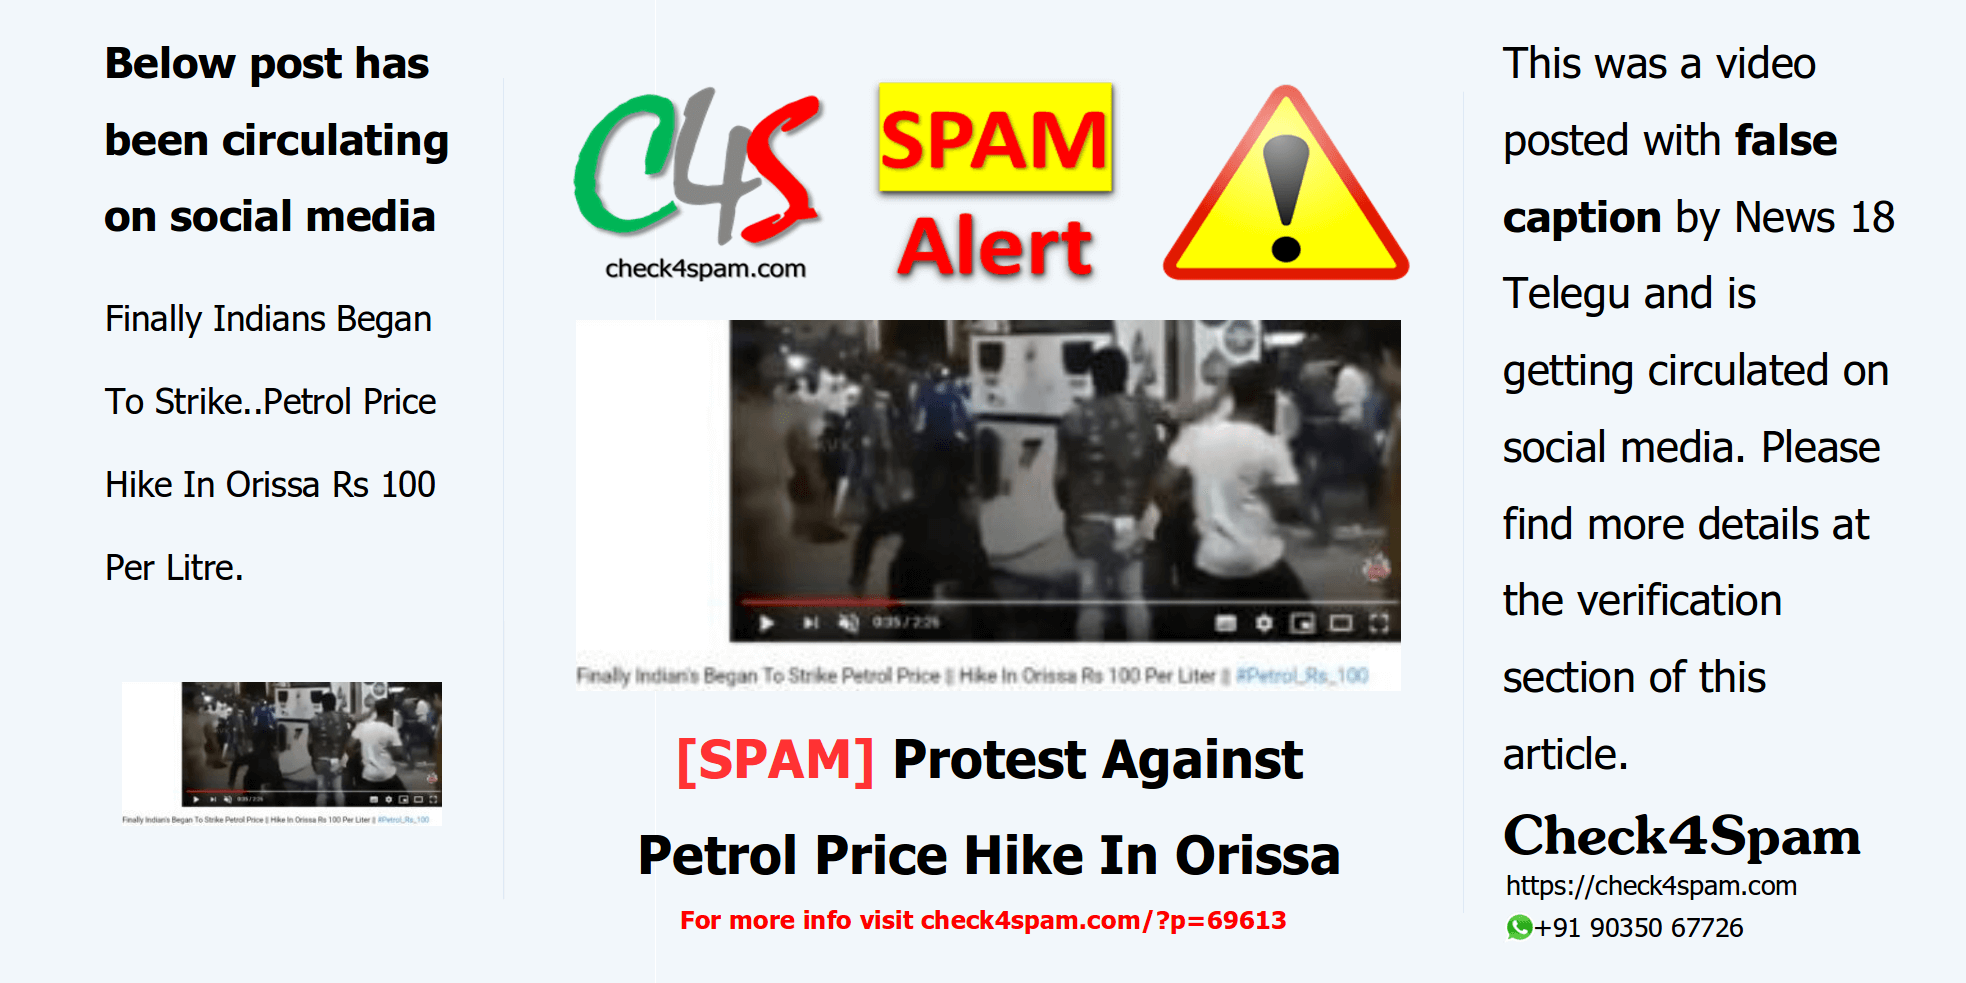 [SPAM] Protest Against Petrol Price Hike In Orissa